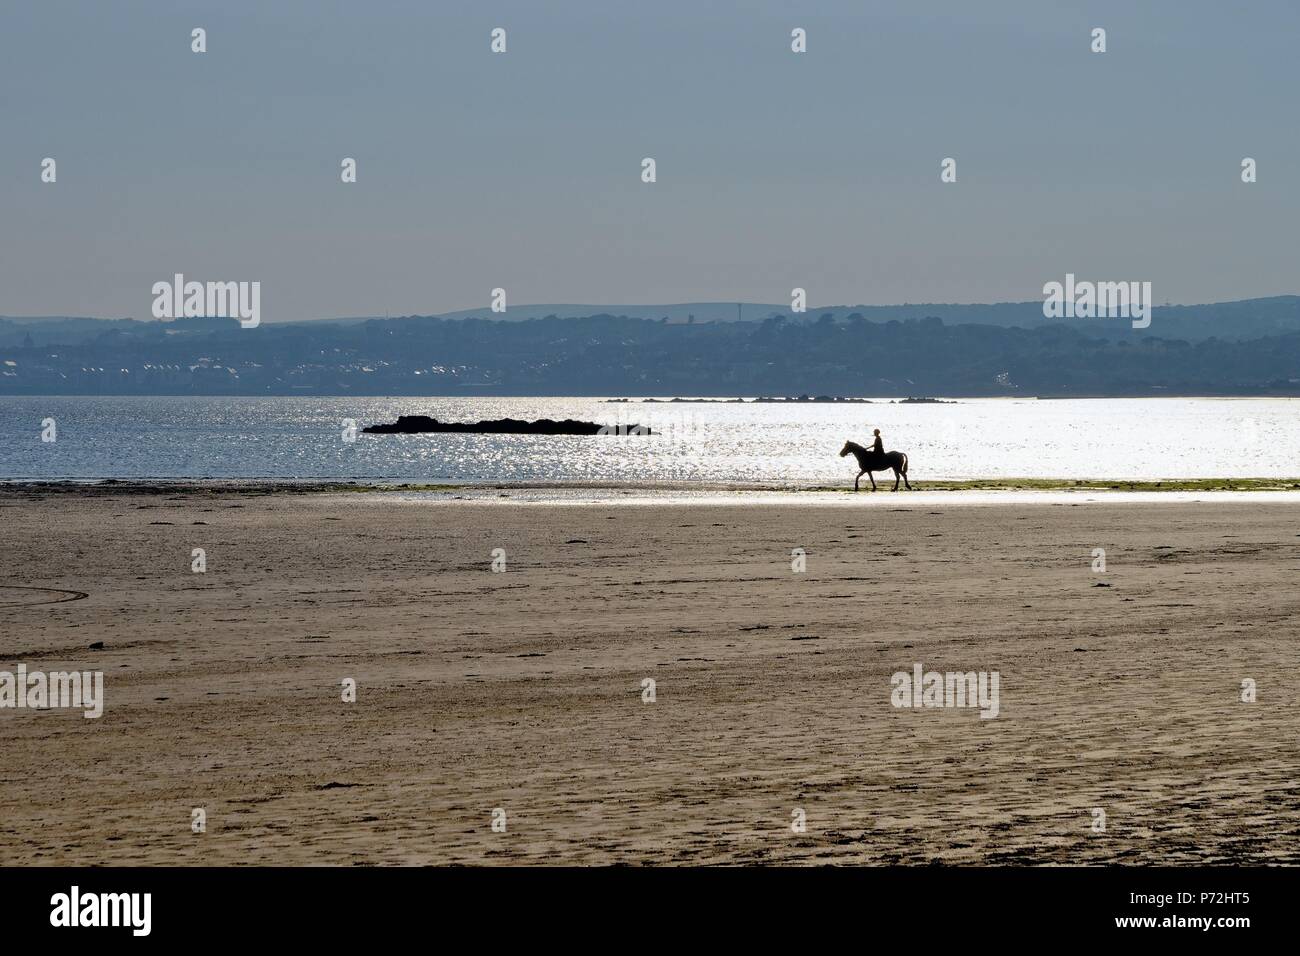 Horse rider on the beach in silhouette on the shoreline at Marazion Cornwall England UK Stock Photo